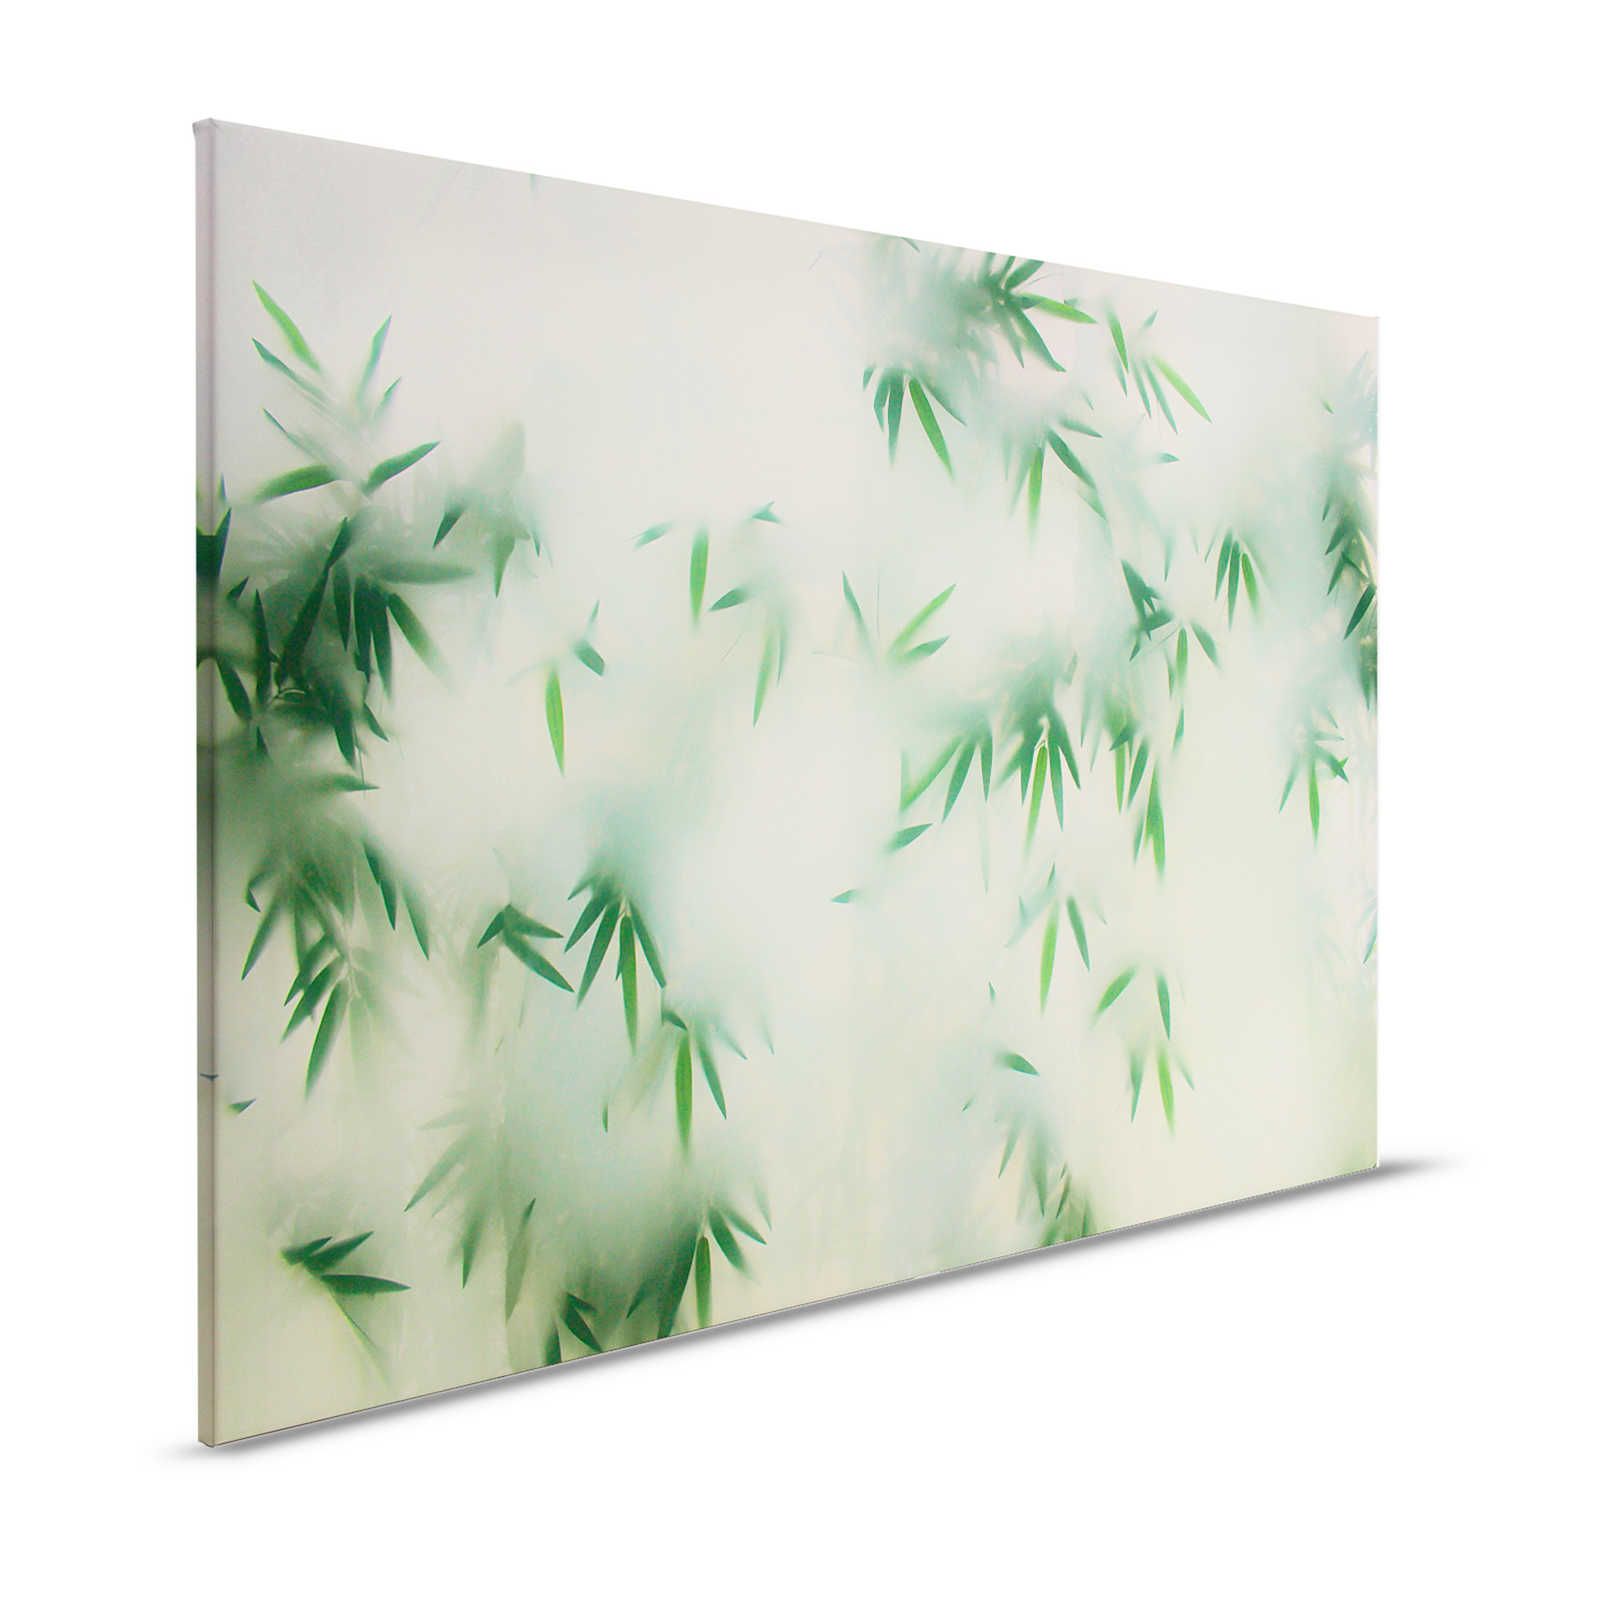 Panda Paradise 2 - Canvas painting green bamboo in the mist - 1,20 m x 0,80 m
